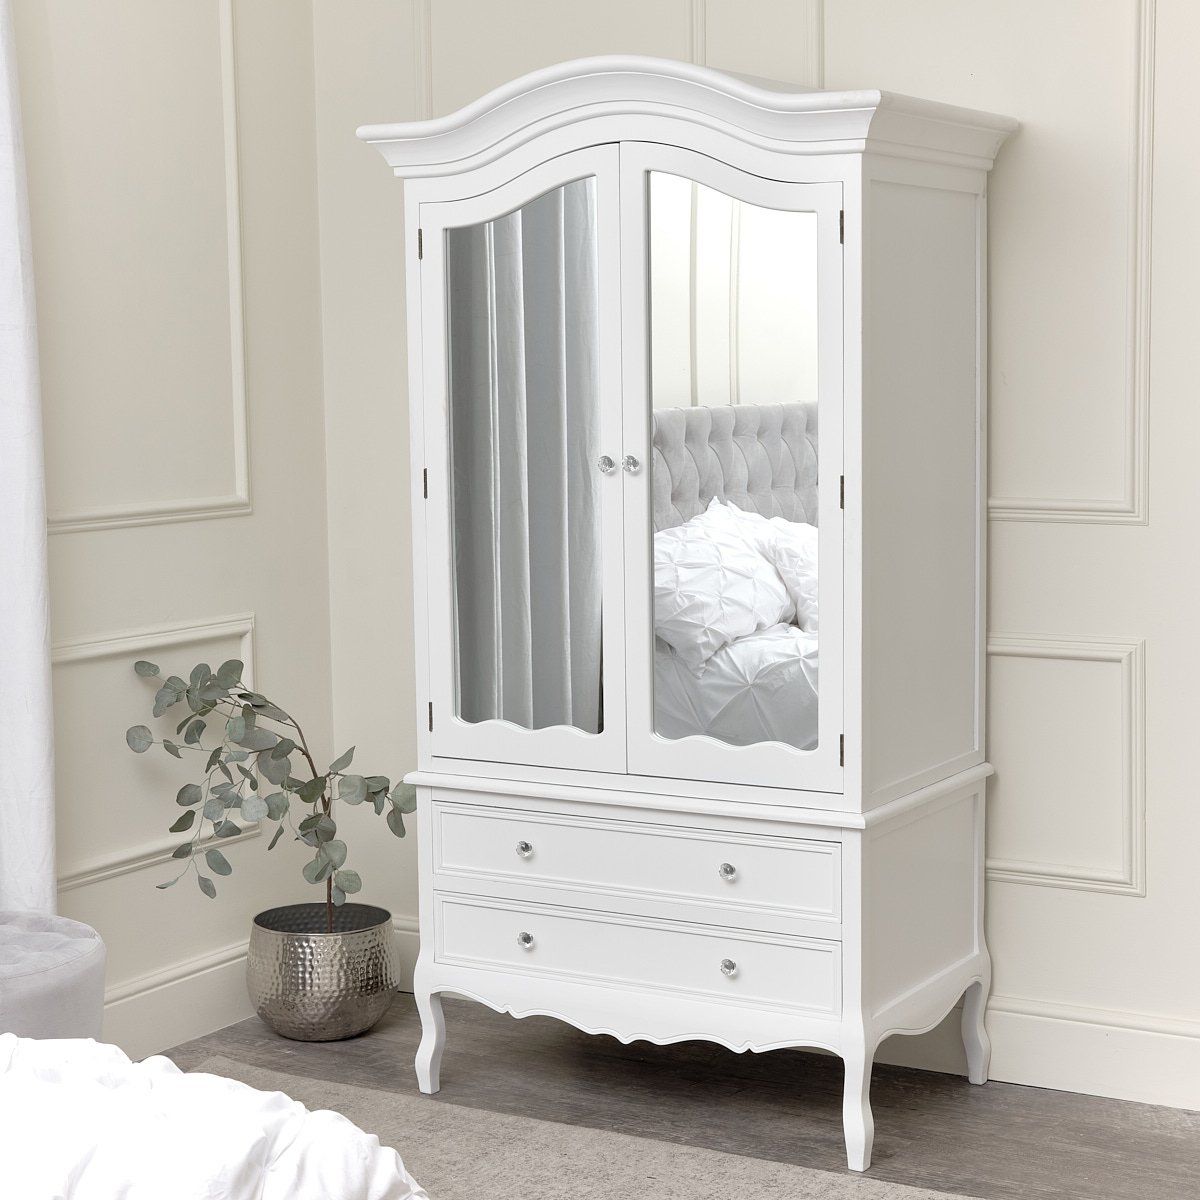 Large White Double Mirrored Wardrobe – Victoria Range In Large Shabby Chic Wardrobes (View 12 of 20)